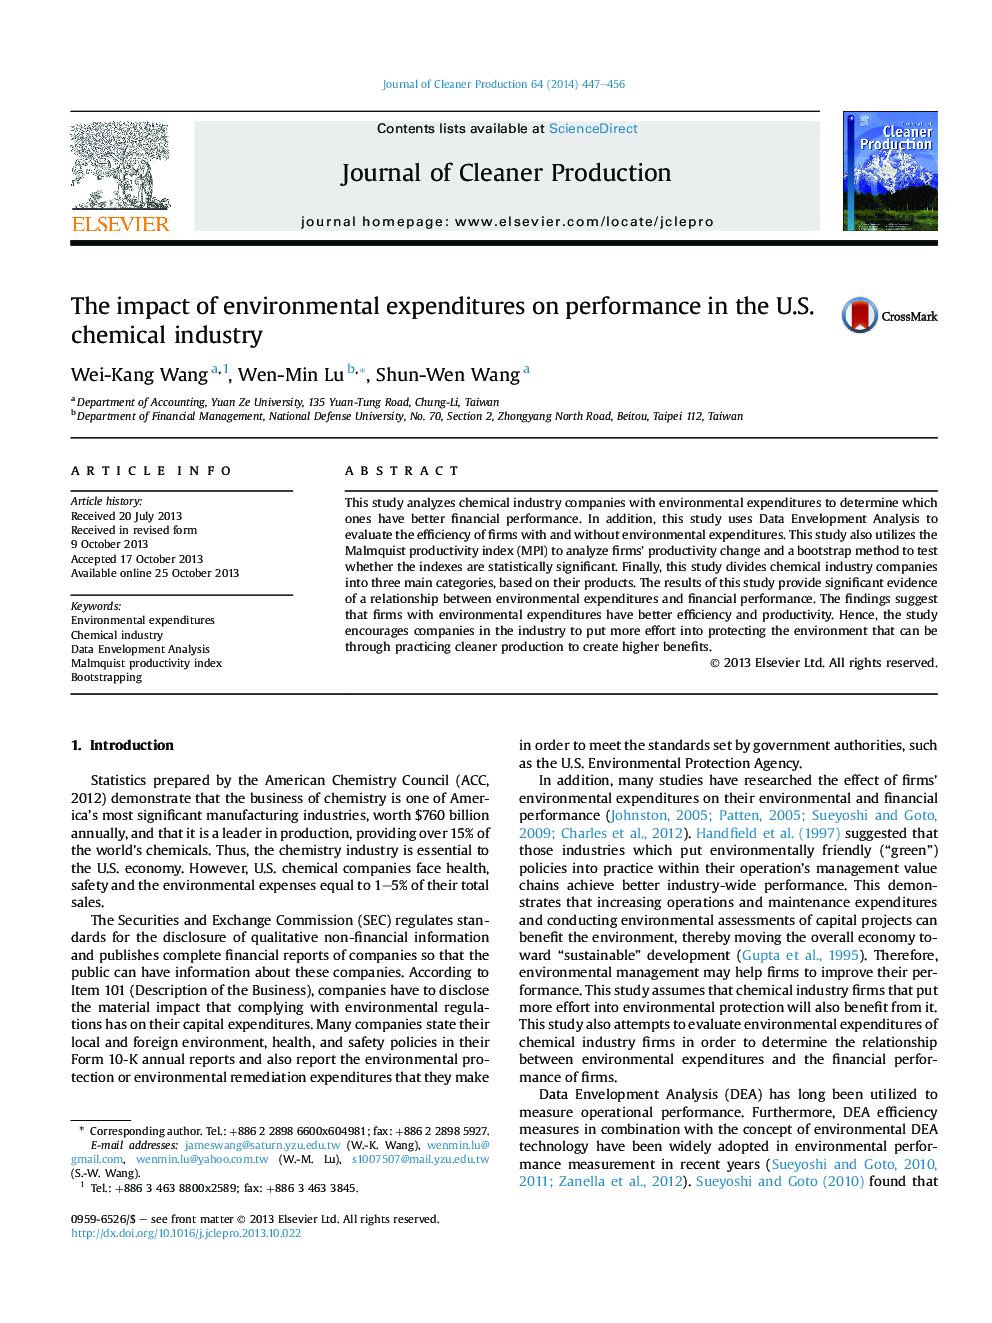 The impact of environmental expenditures on performance in the U.S. chemical industry